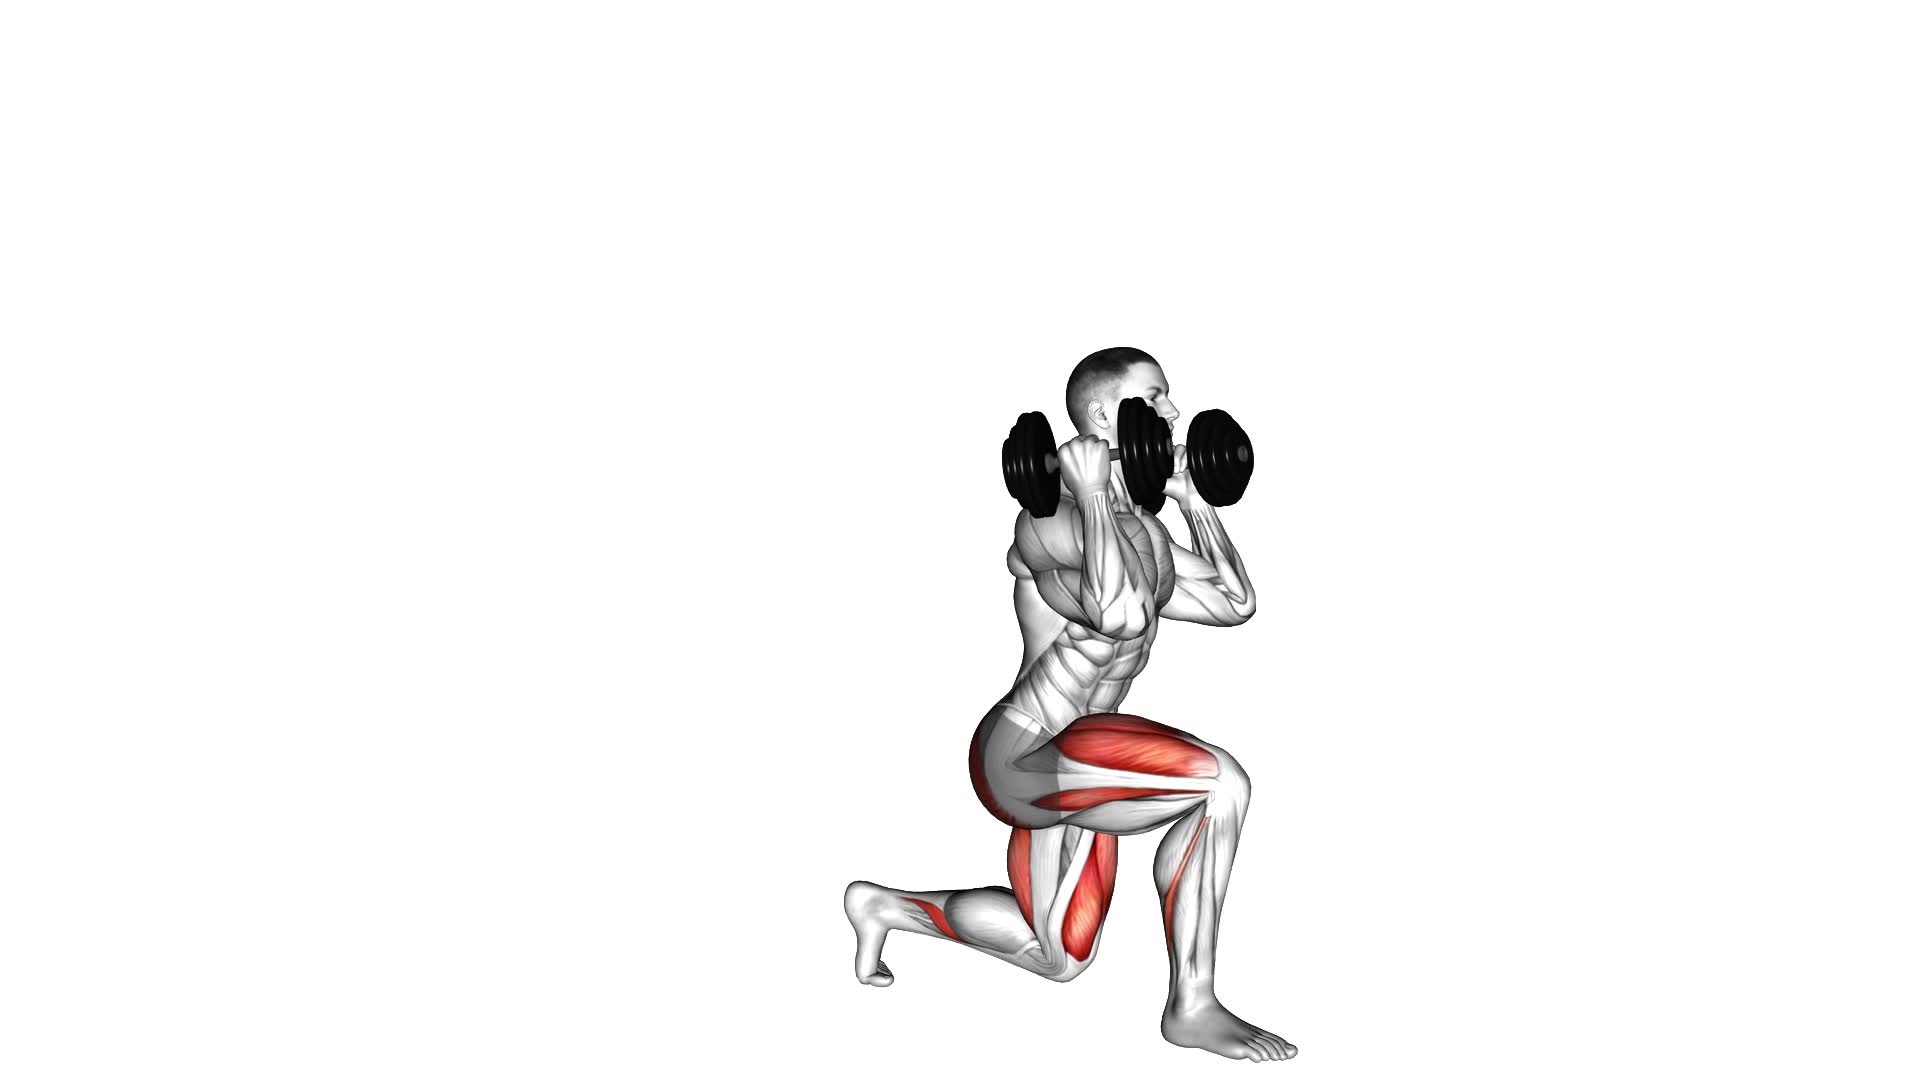 Dumbbell Front Rack Lunge - Video Exercise Guide & Tips